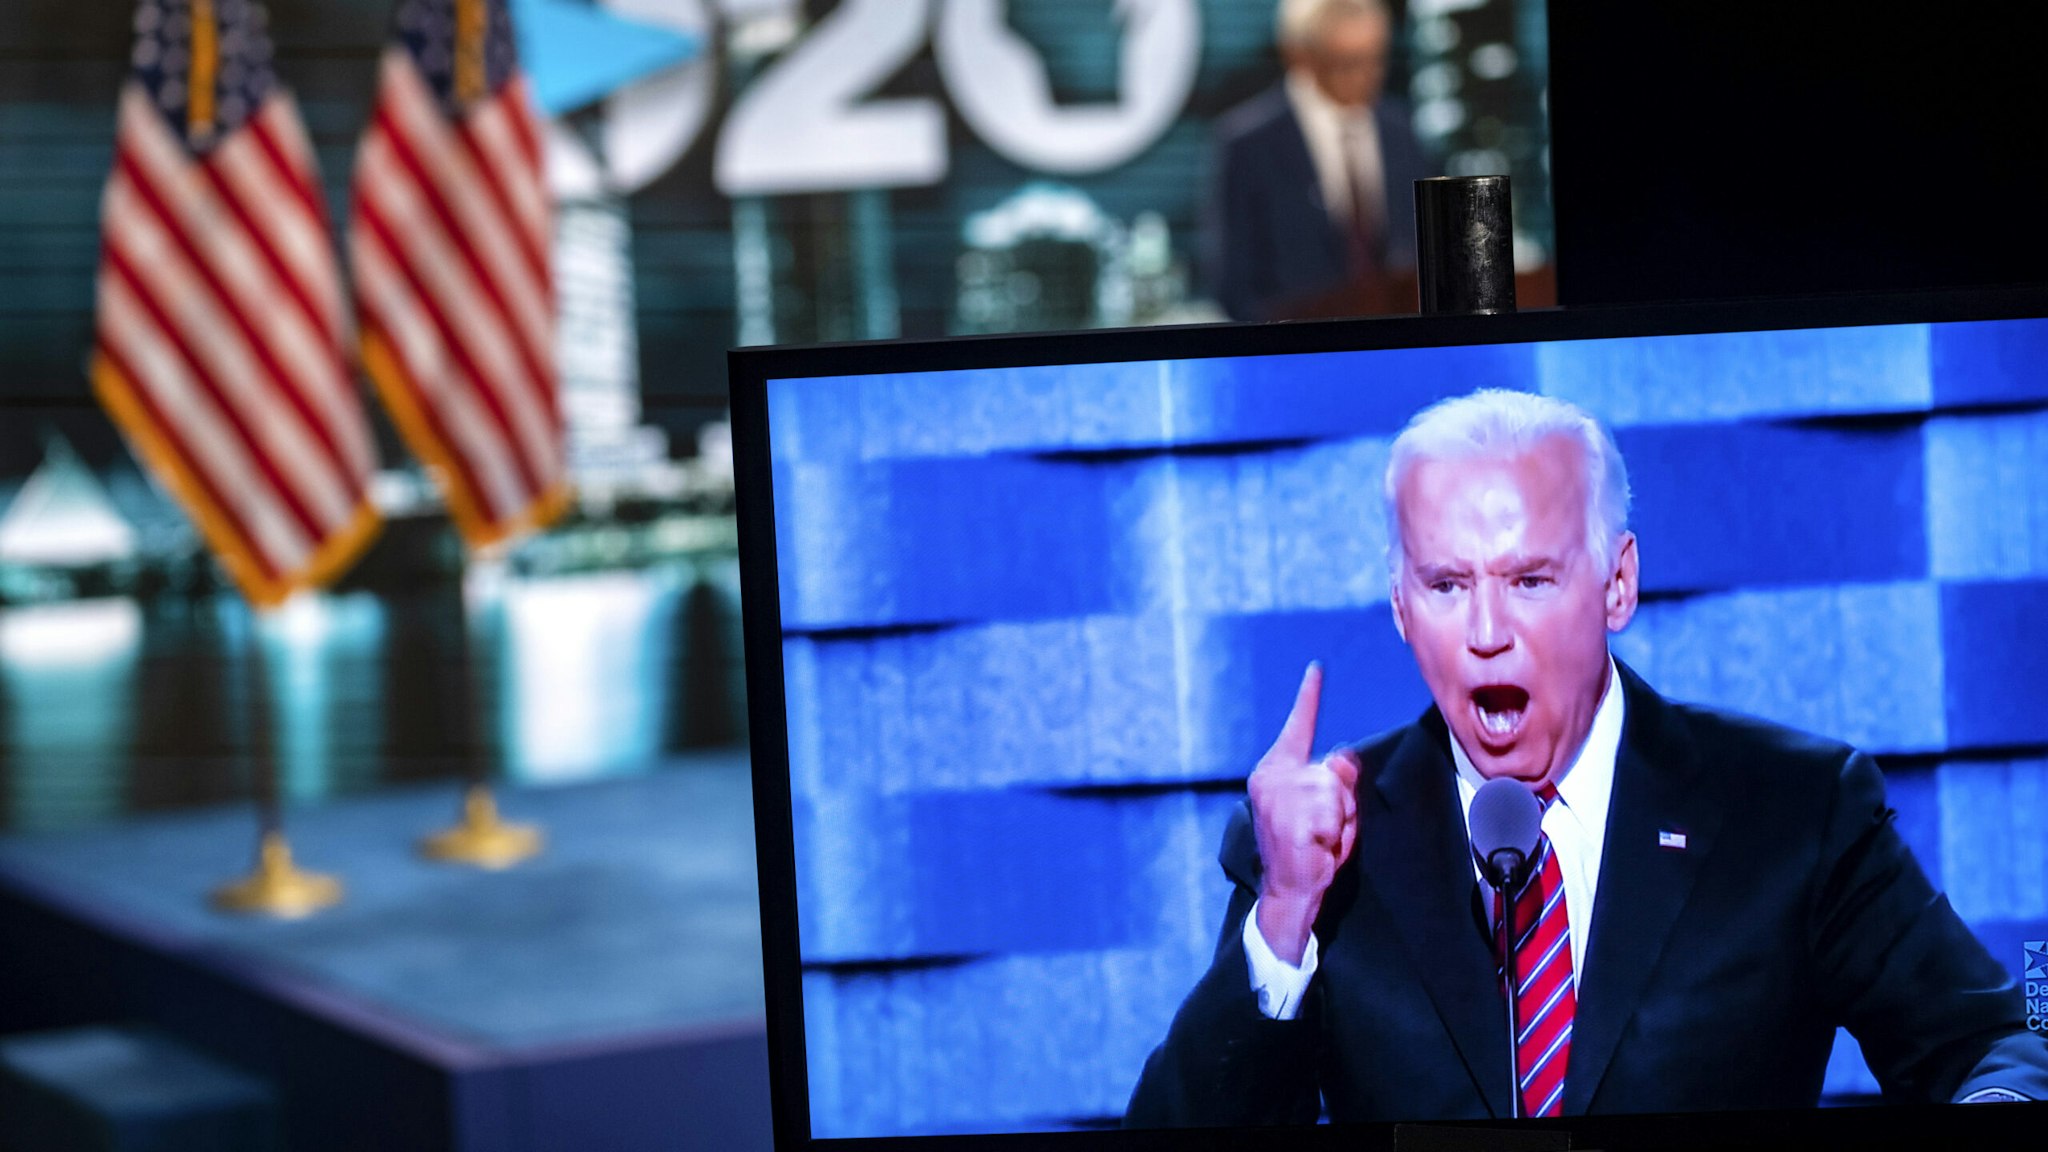 Former Vice President Joe Biden, Democratic presidential nominee, is displayed on a television monitor during the virtual Democratic National Convention in Milwaukee, Wisconsin, U.S., on Wednesday, Aug. 19, 2020. Senator Kamala Harris's prime-time speech is the first glimpse of how Joe Biden's campaign plans to deploy a history-making vice presidential nominee for a campaign that has largely been grounded by the coronavirus.